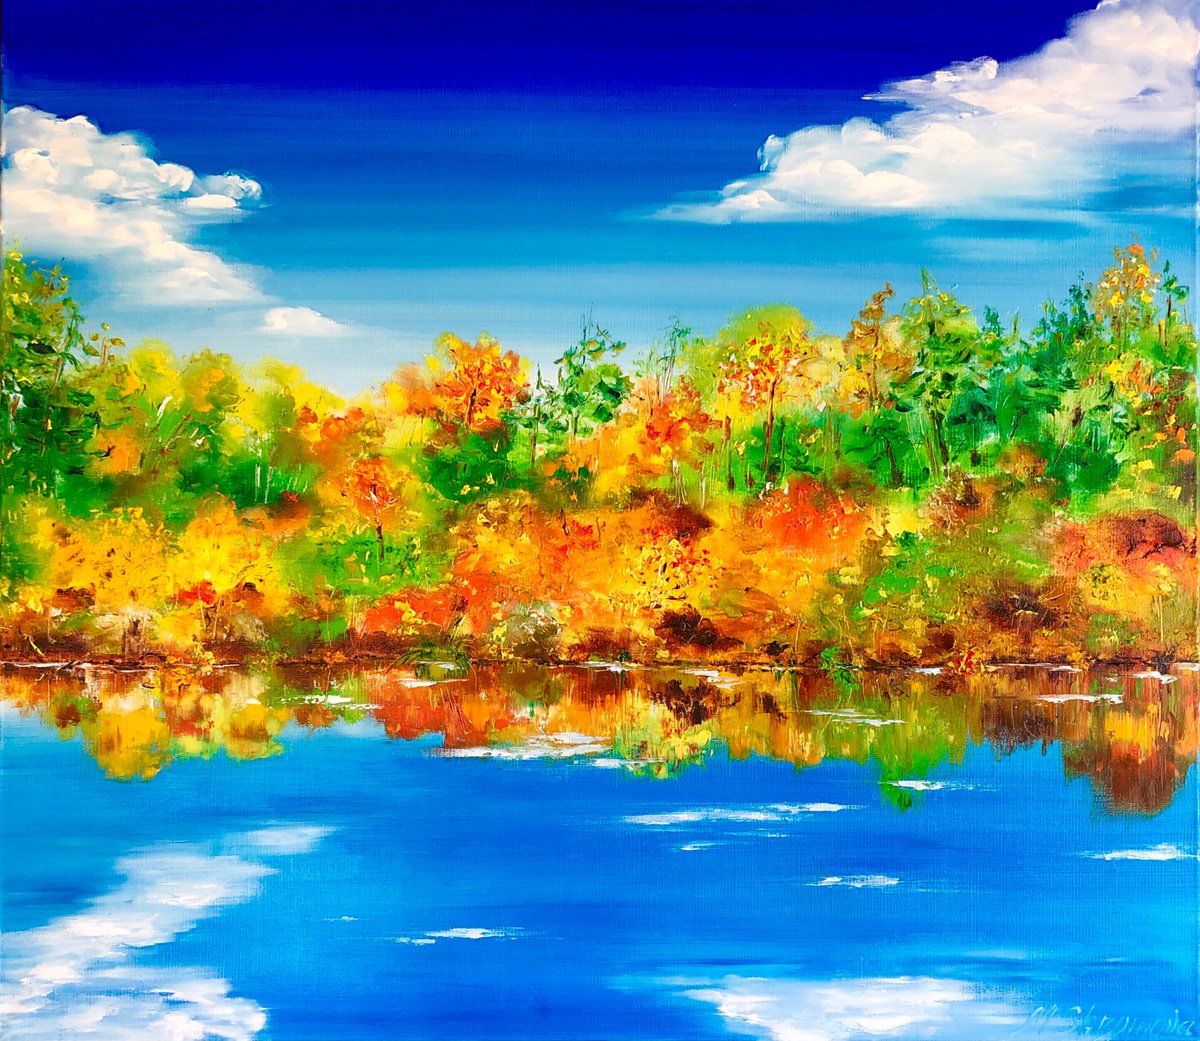 HARMONY ON THE SHORES - Autumn. October. Bright landscape. Blue river. Warm weather. Red f... by Marina Skromova